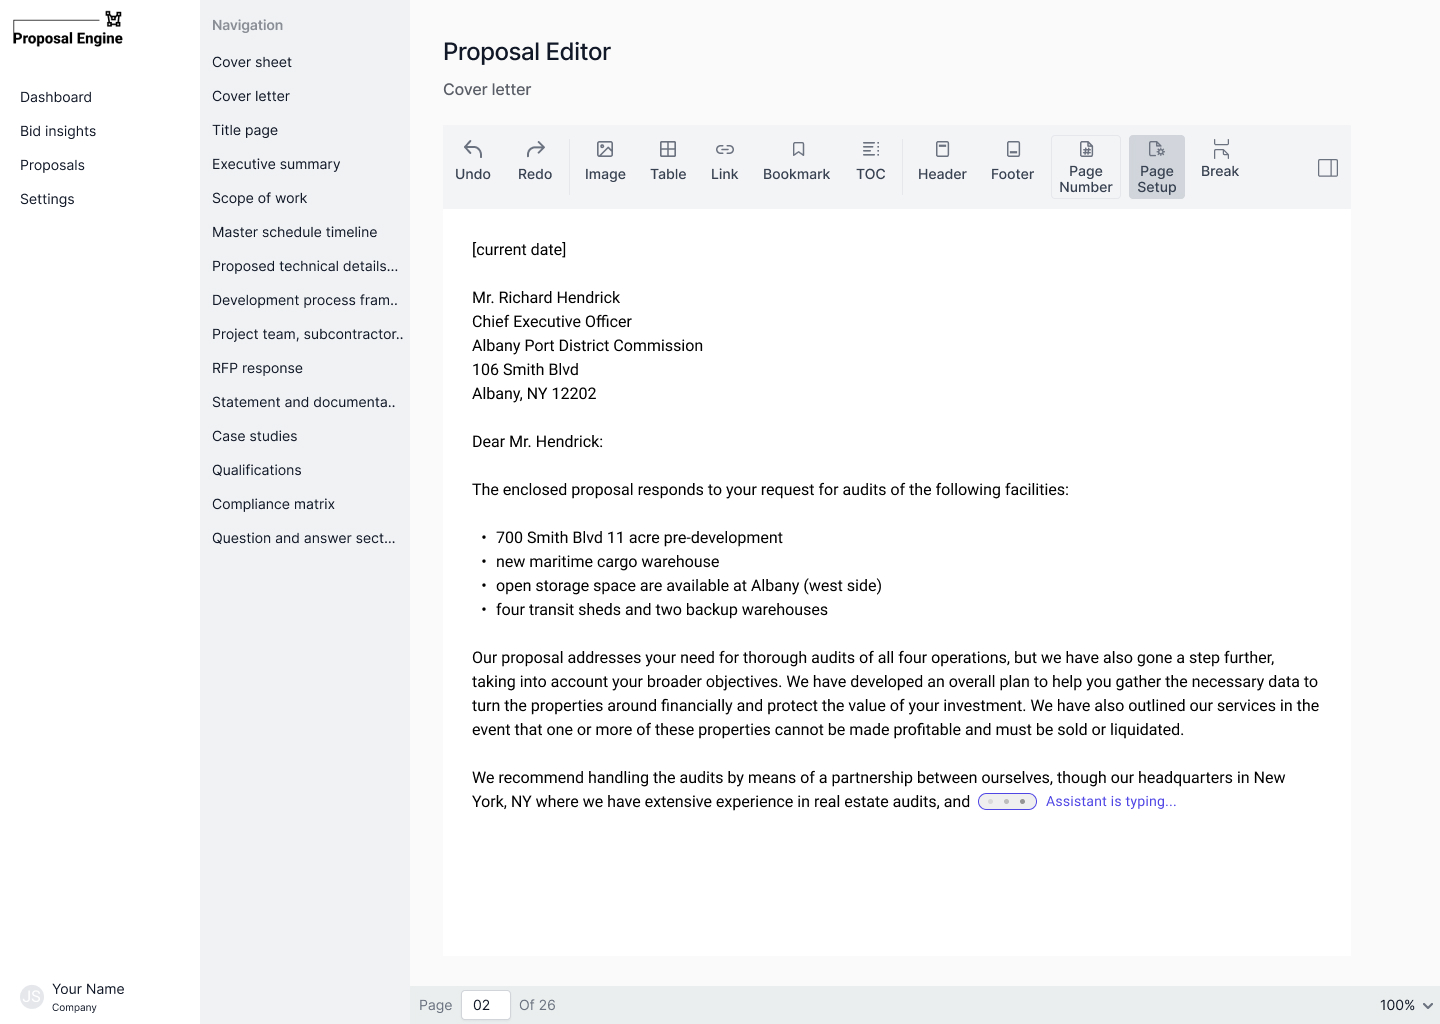 The platform is generating text for the cover letter